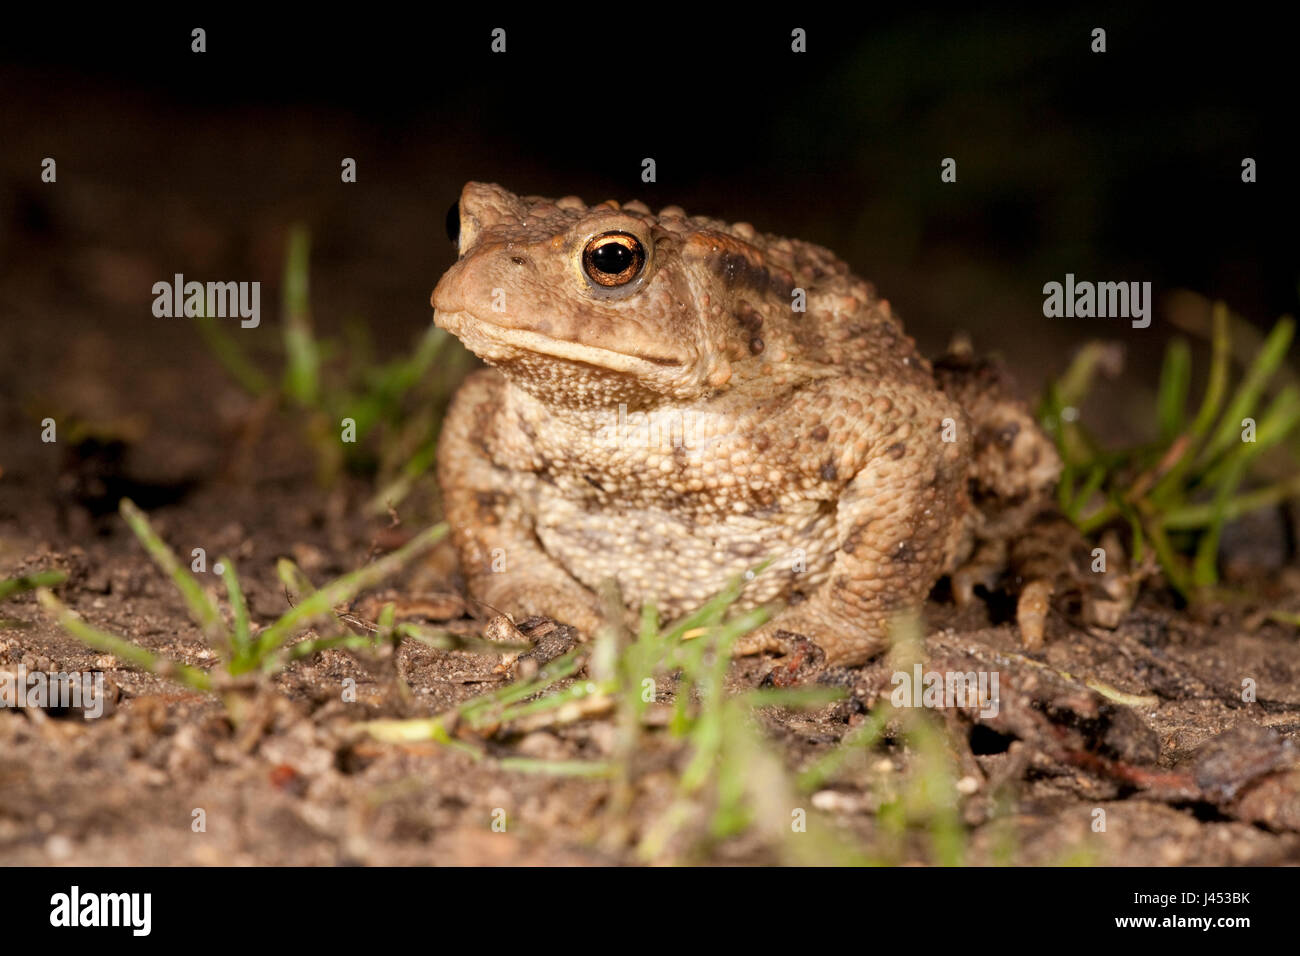 photo of a common toad at night Stock Photo